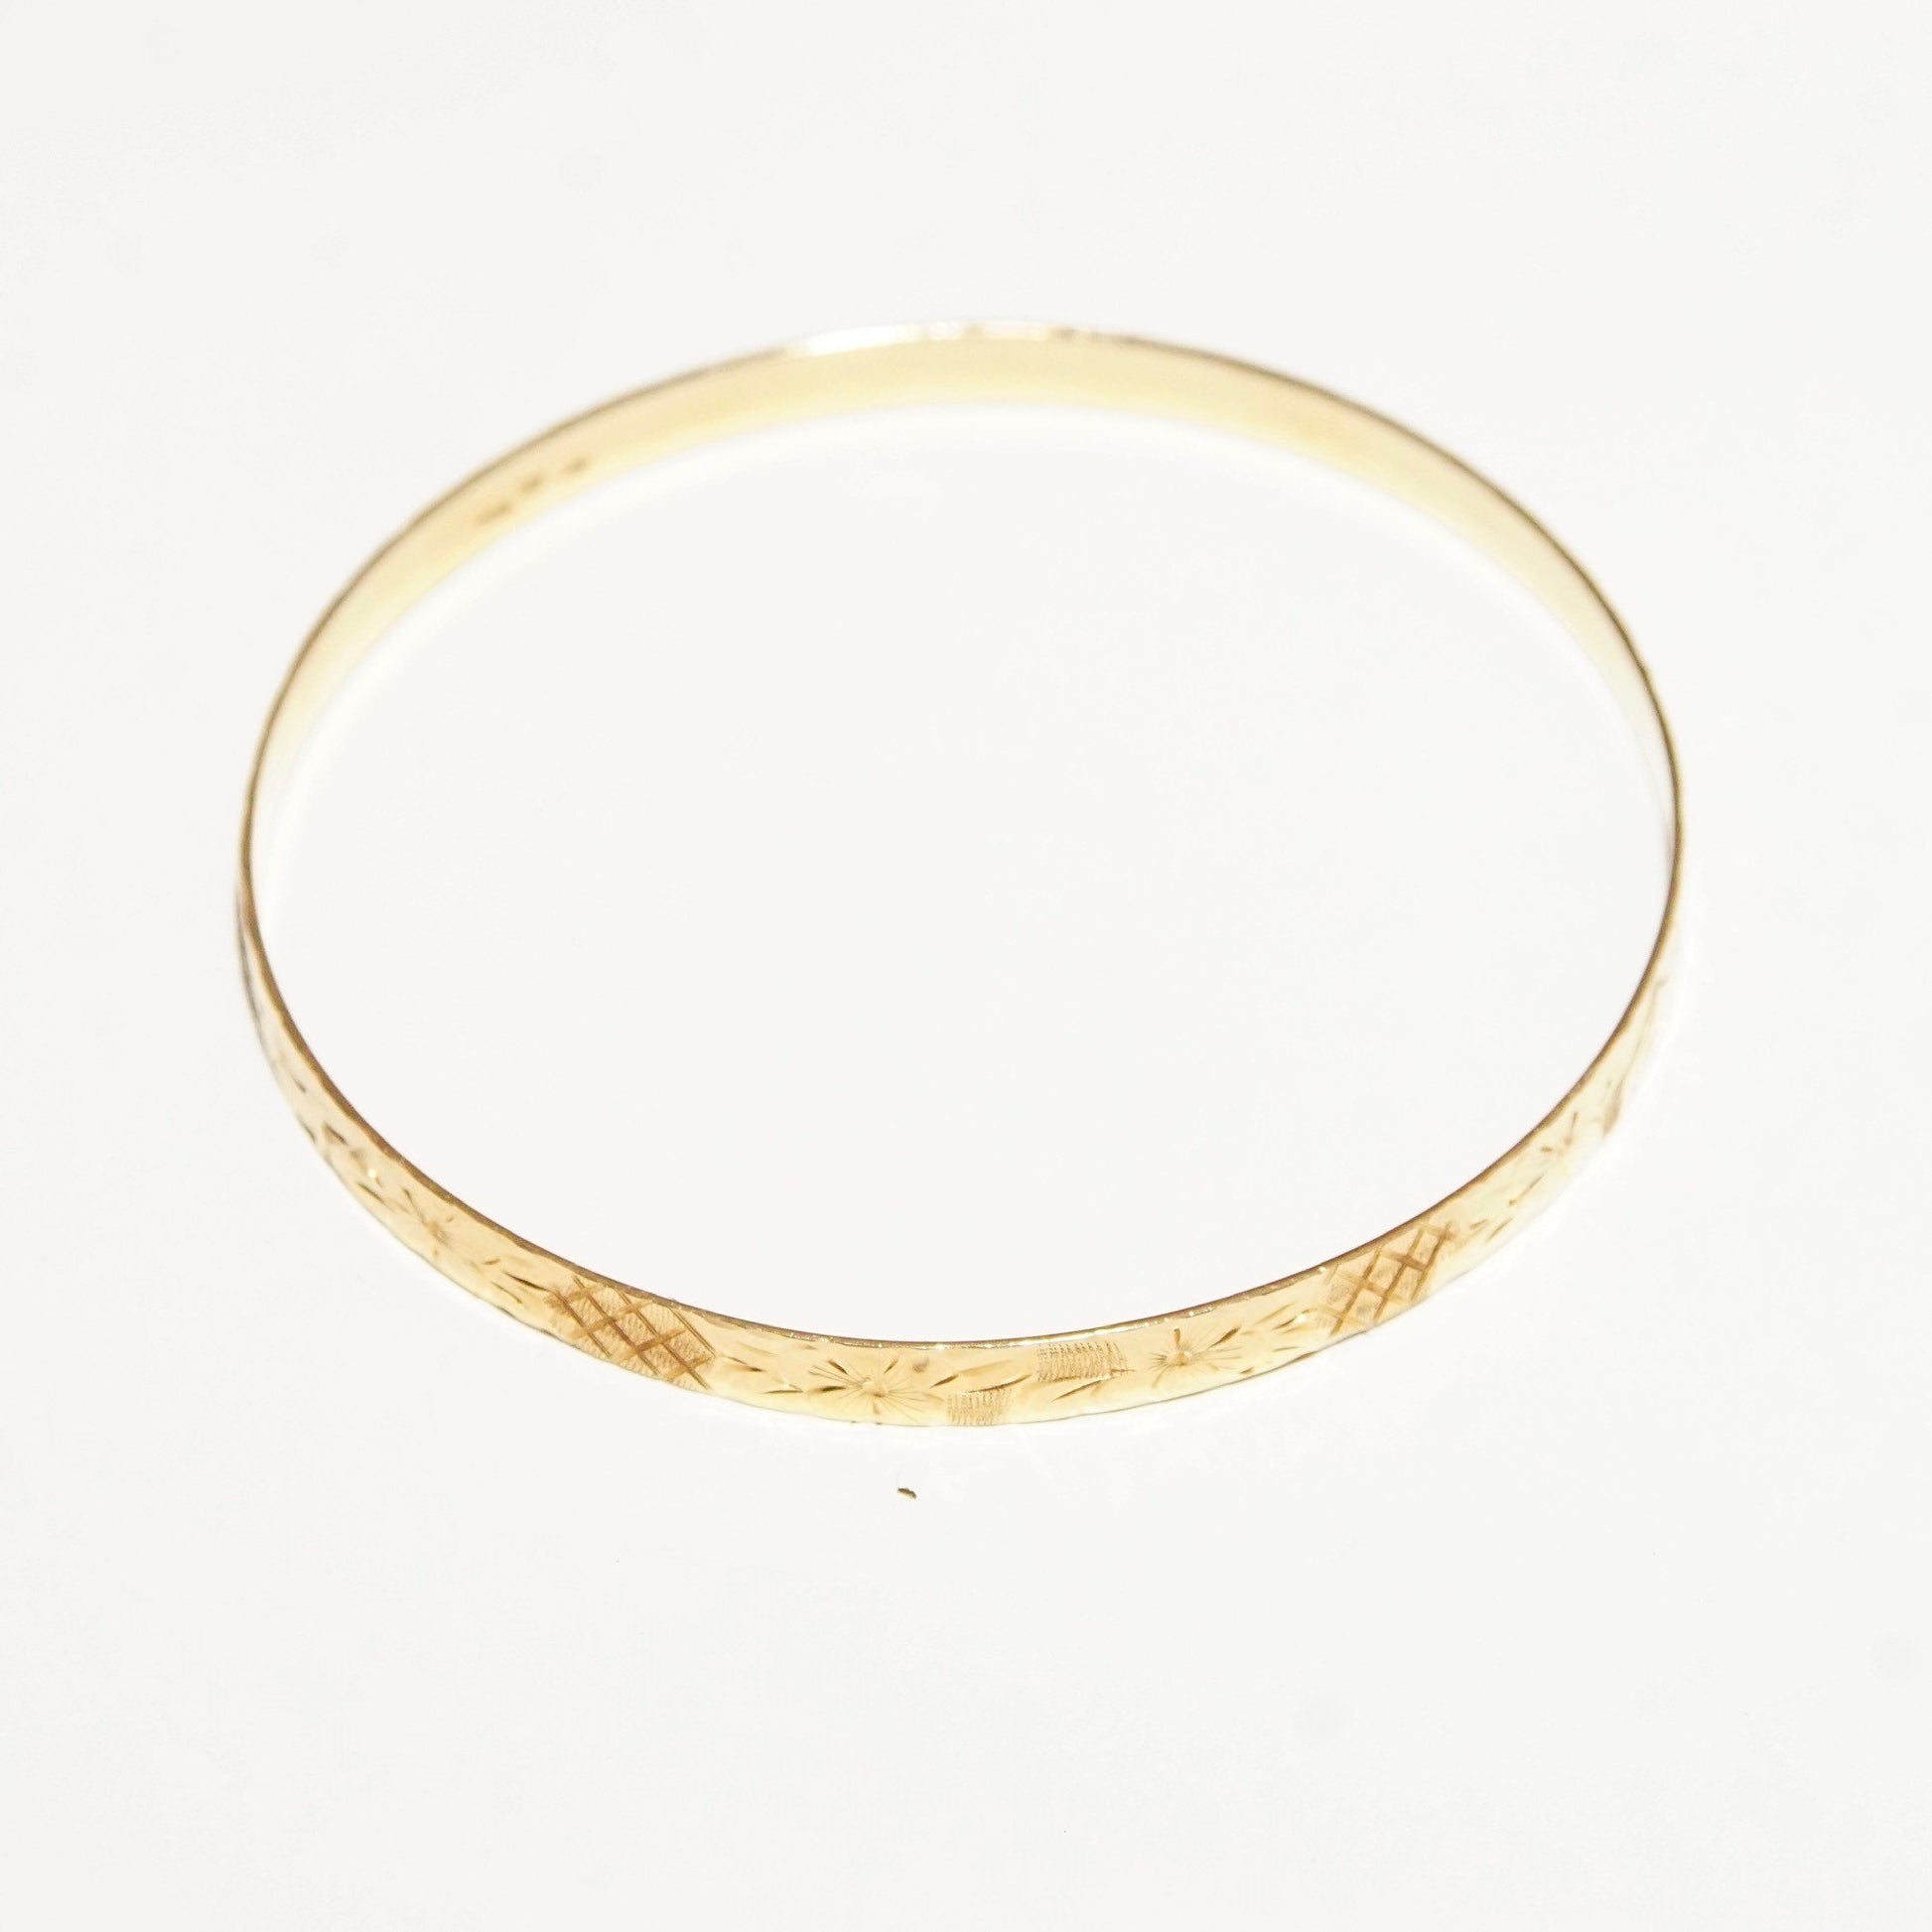 14K yellow gold bangle bracelet with diamond-cut floral designs, 5mm wide, perfect for stacking or wearing alone.